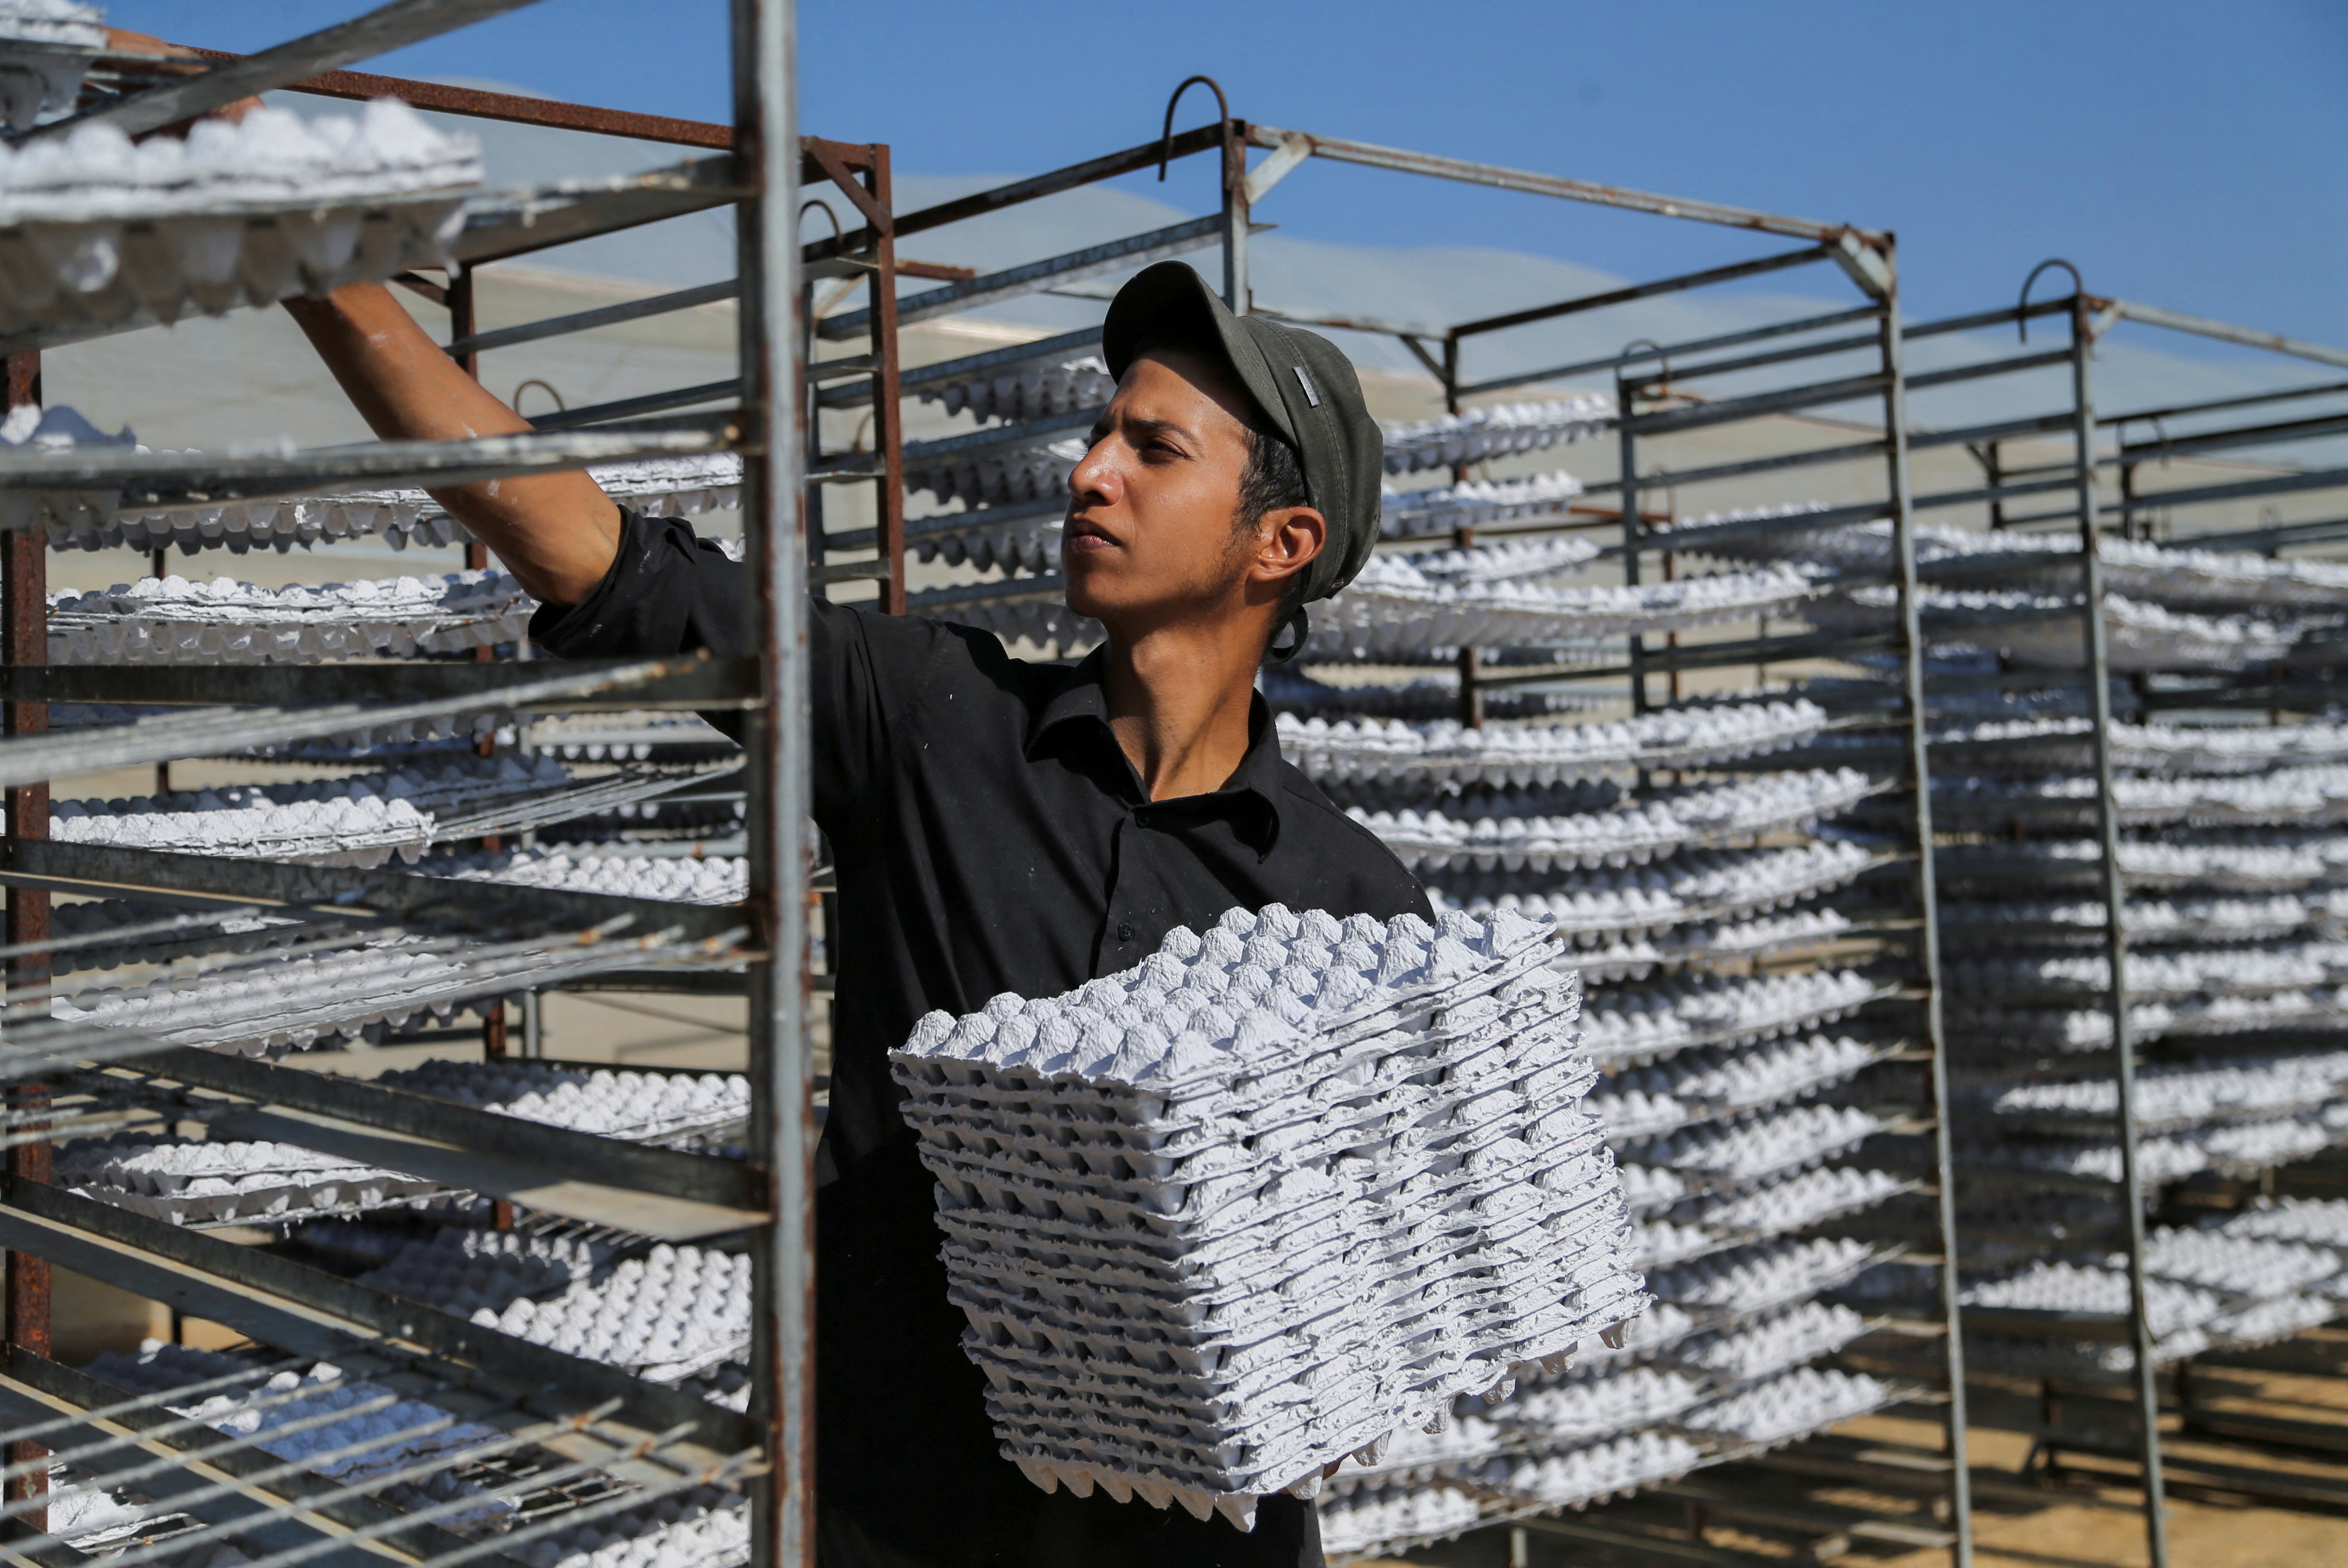 Gaza farmer recycles paper waste into egg trays